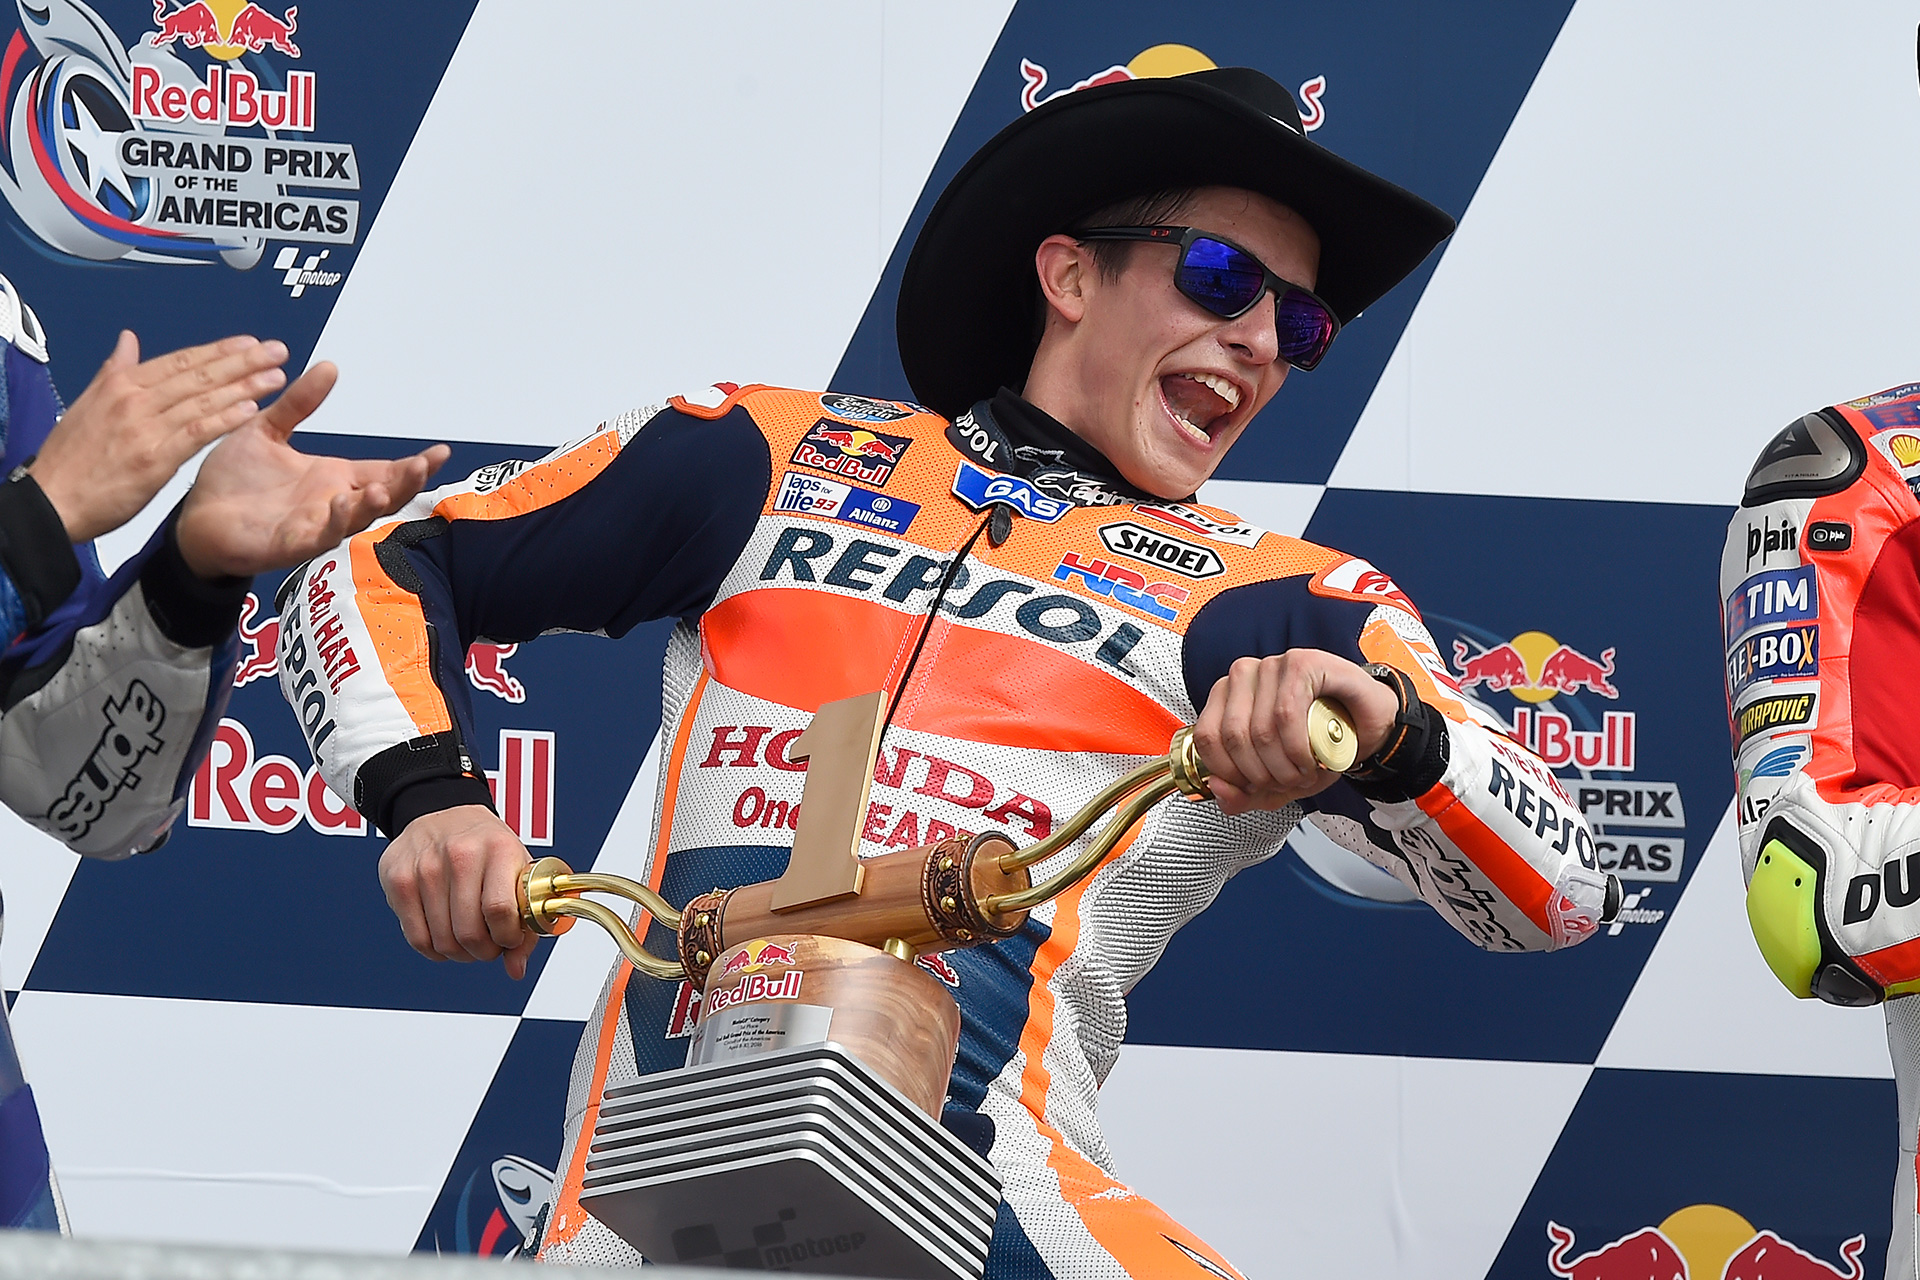 Opinion: Marc Marquez And The Edge Of Madness - Roadracing World